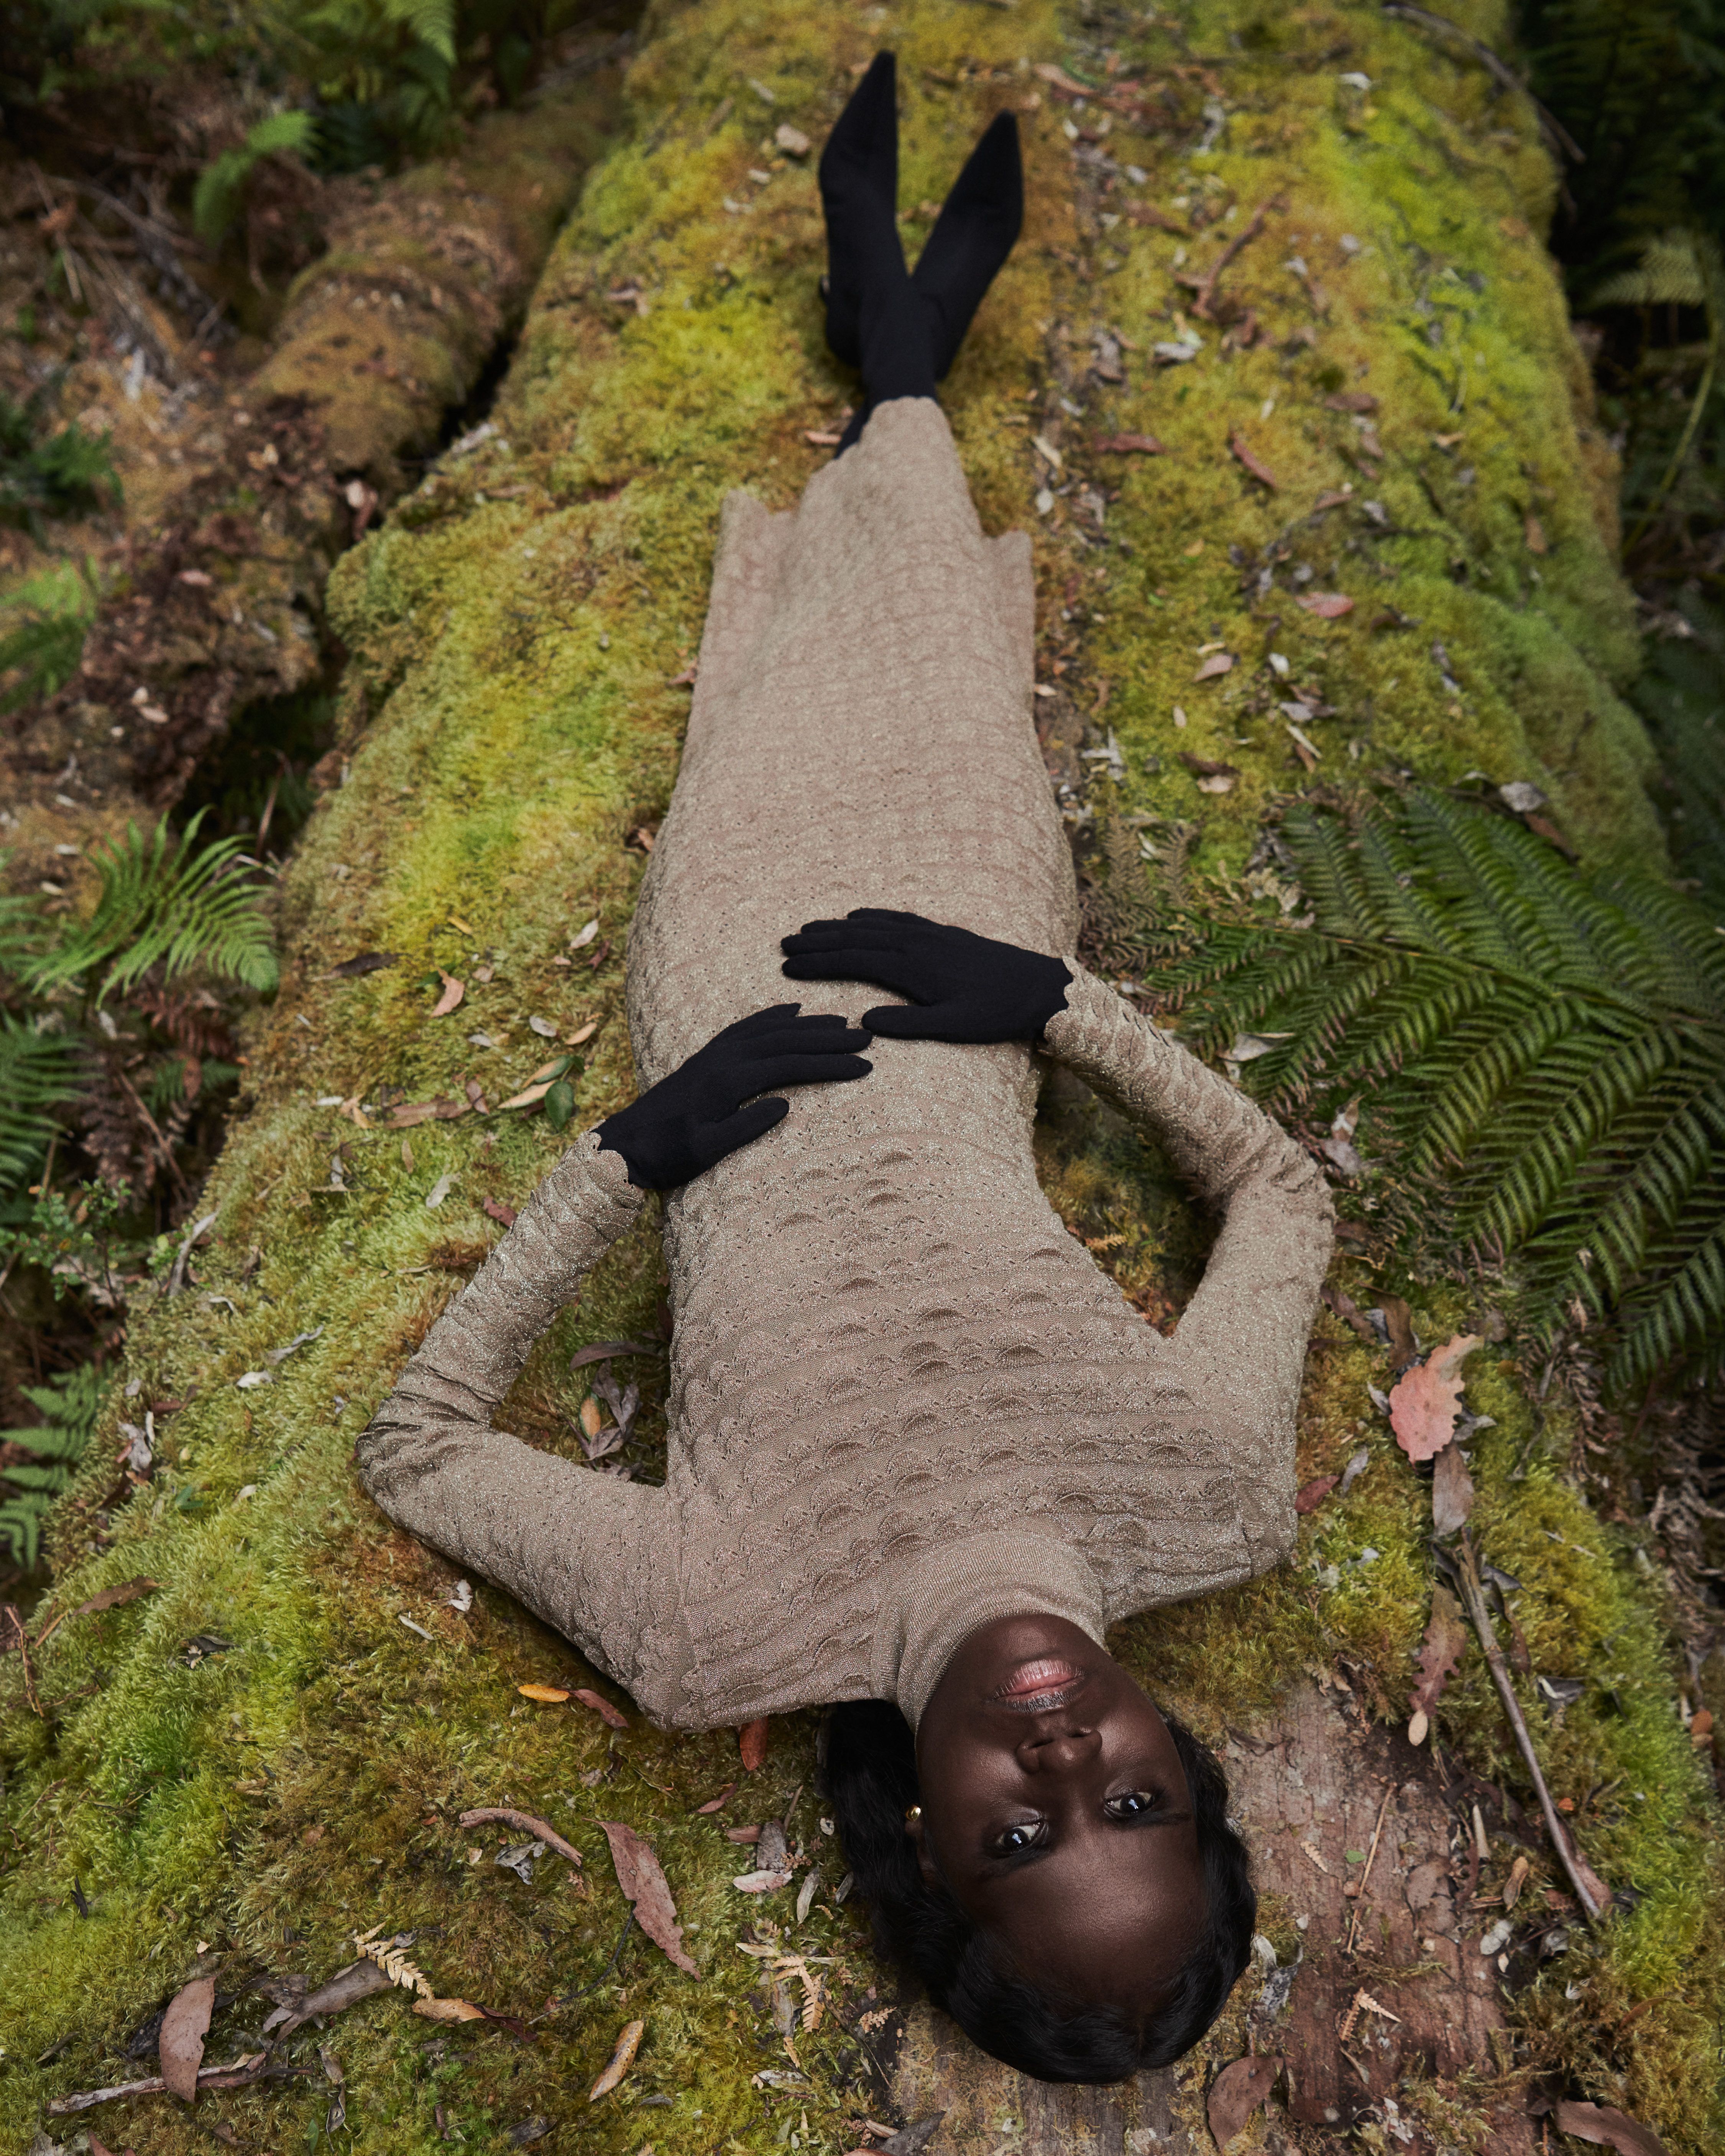 Tarlisa Gaykamangu reclined on moss in the forest wearing a brown knitted gown.